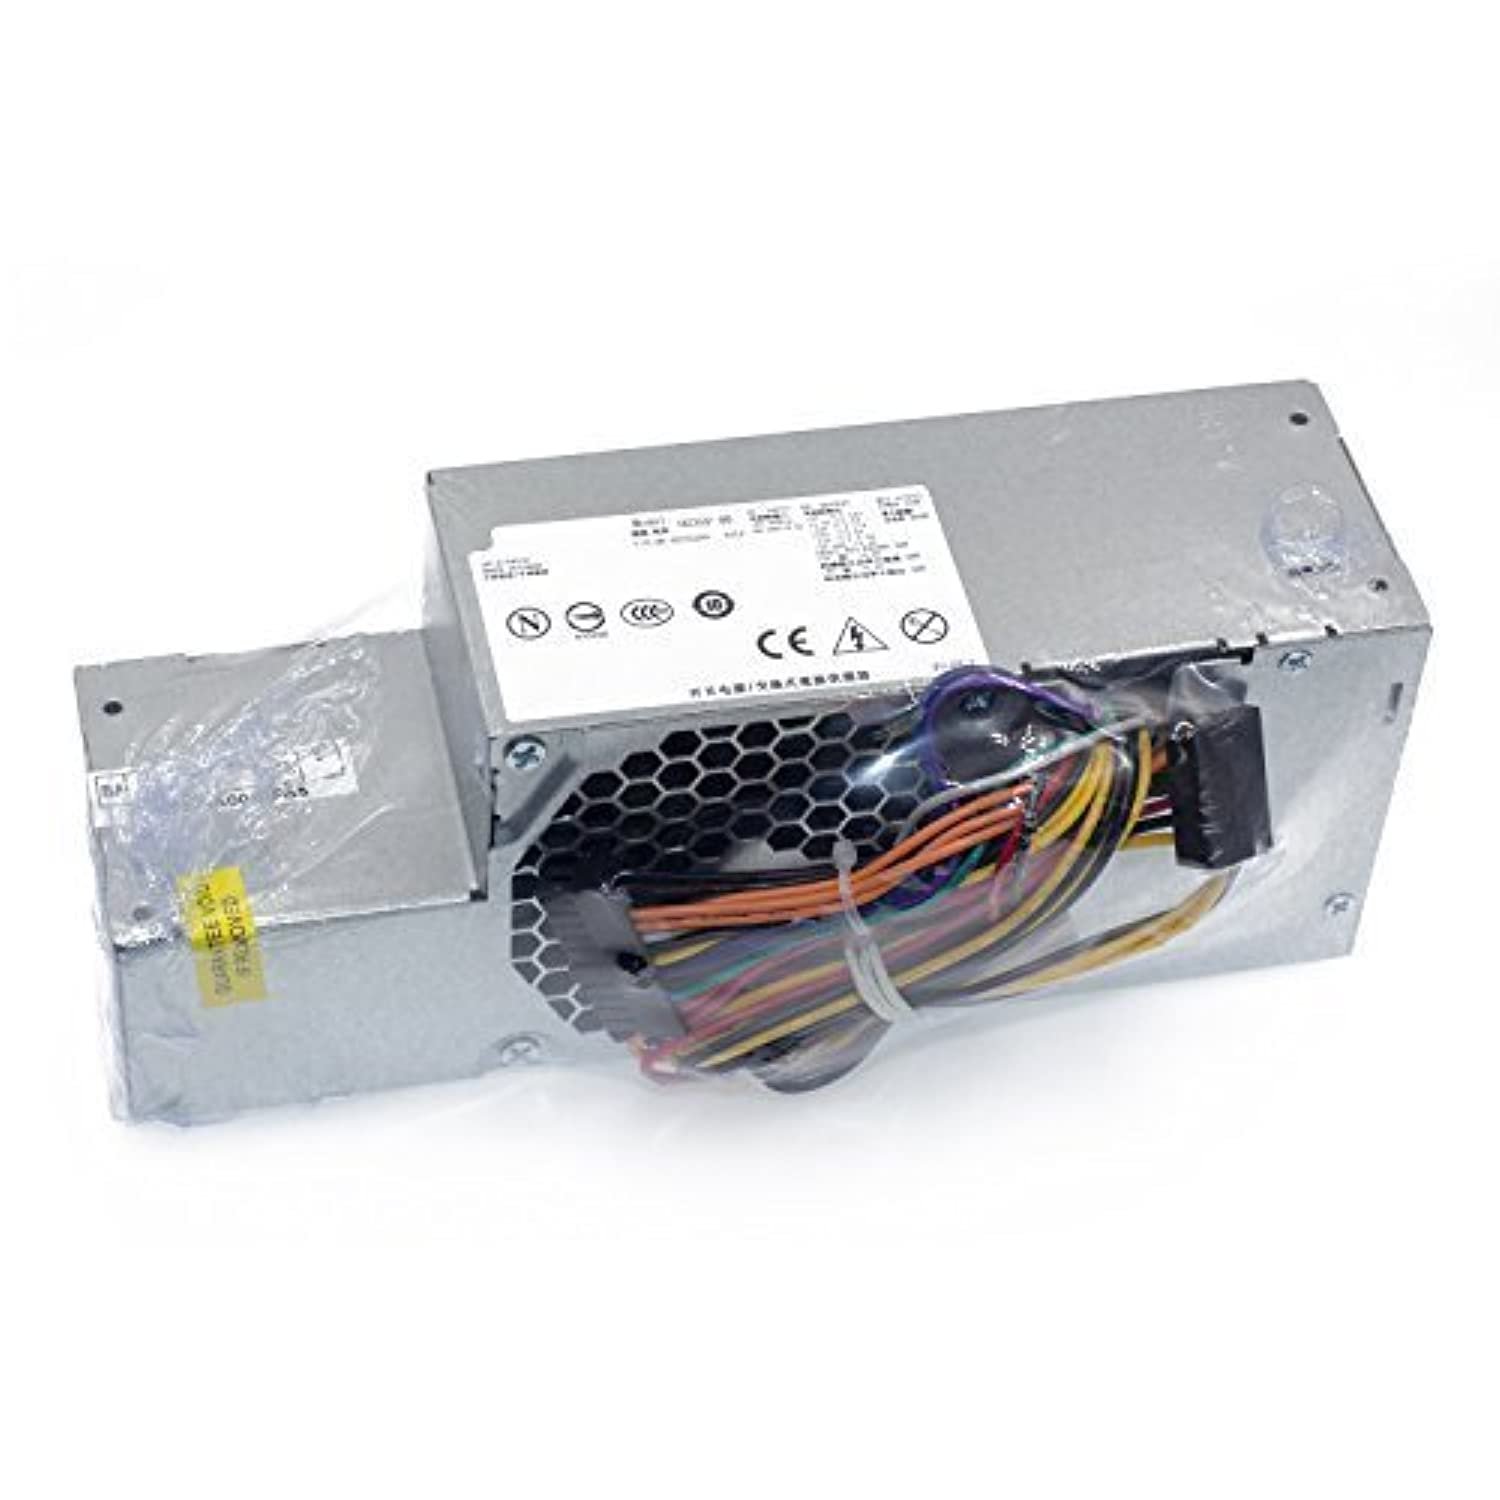 235W Power Supply Compatible Dell Optiplex 580, 760, 780, 960 Small Form Factor (Sff) Systems Pw11